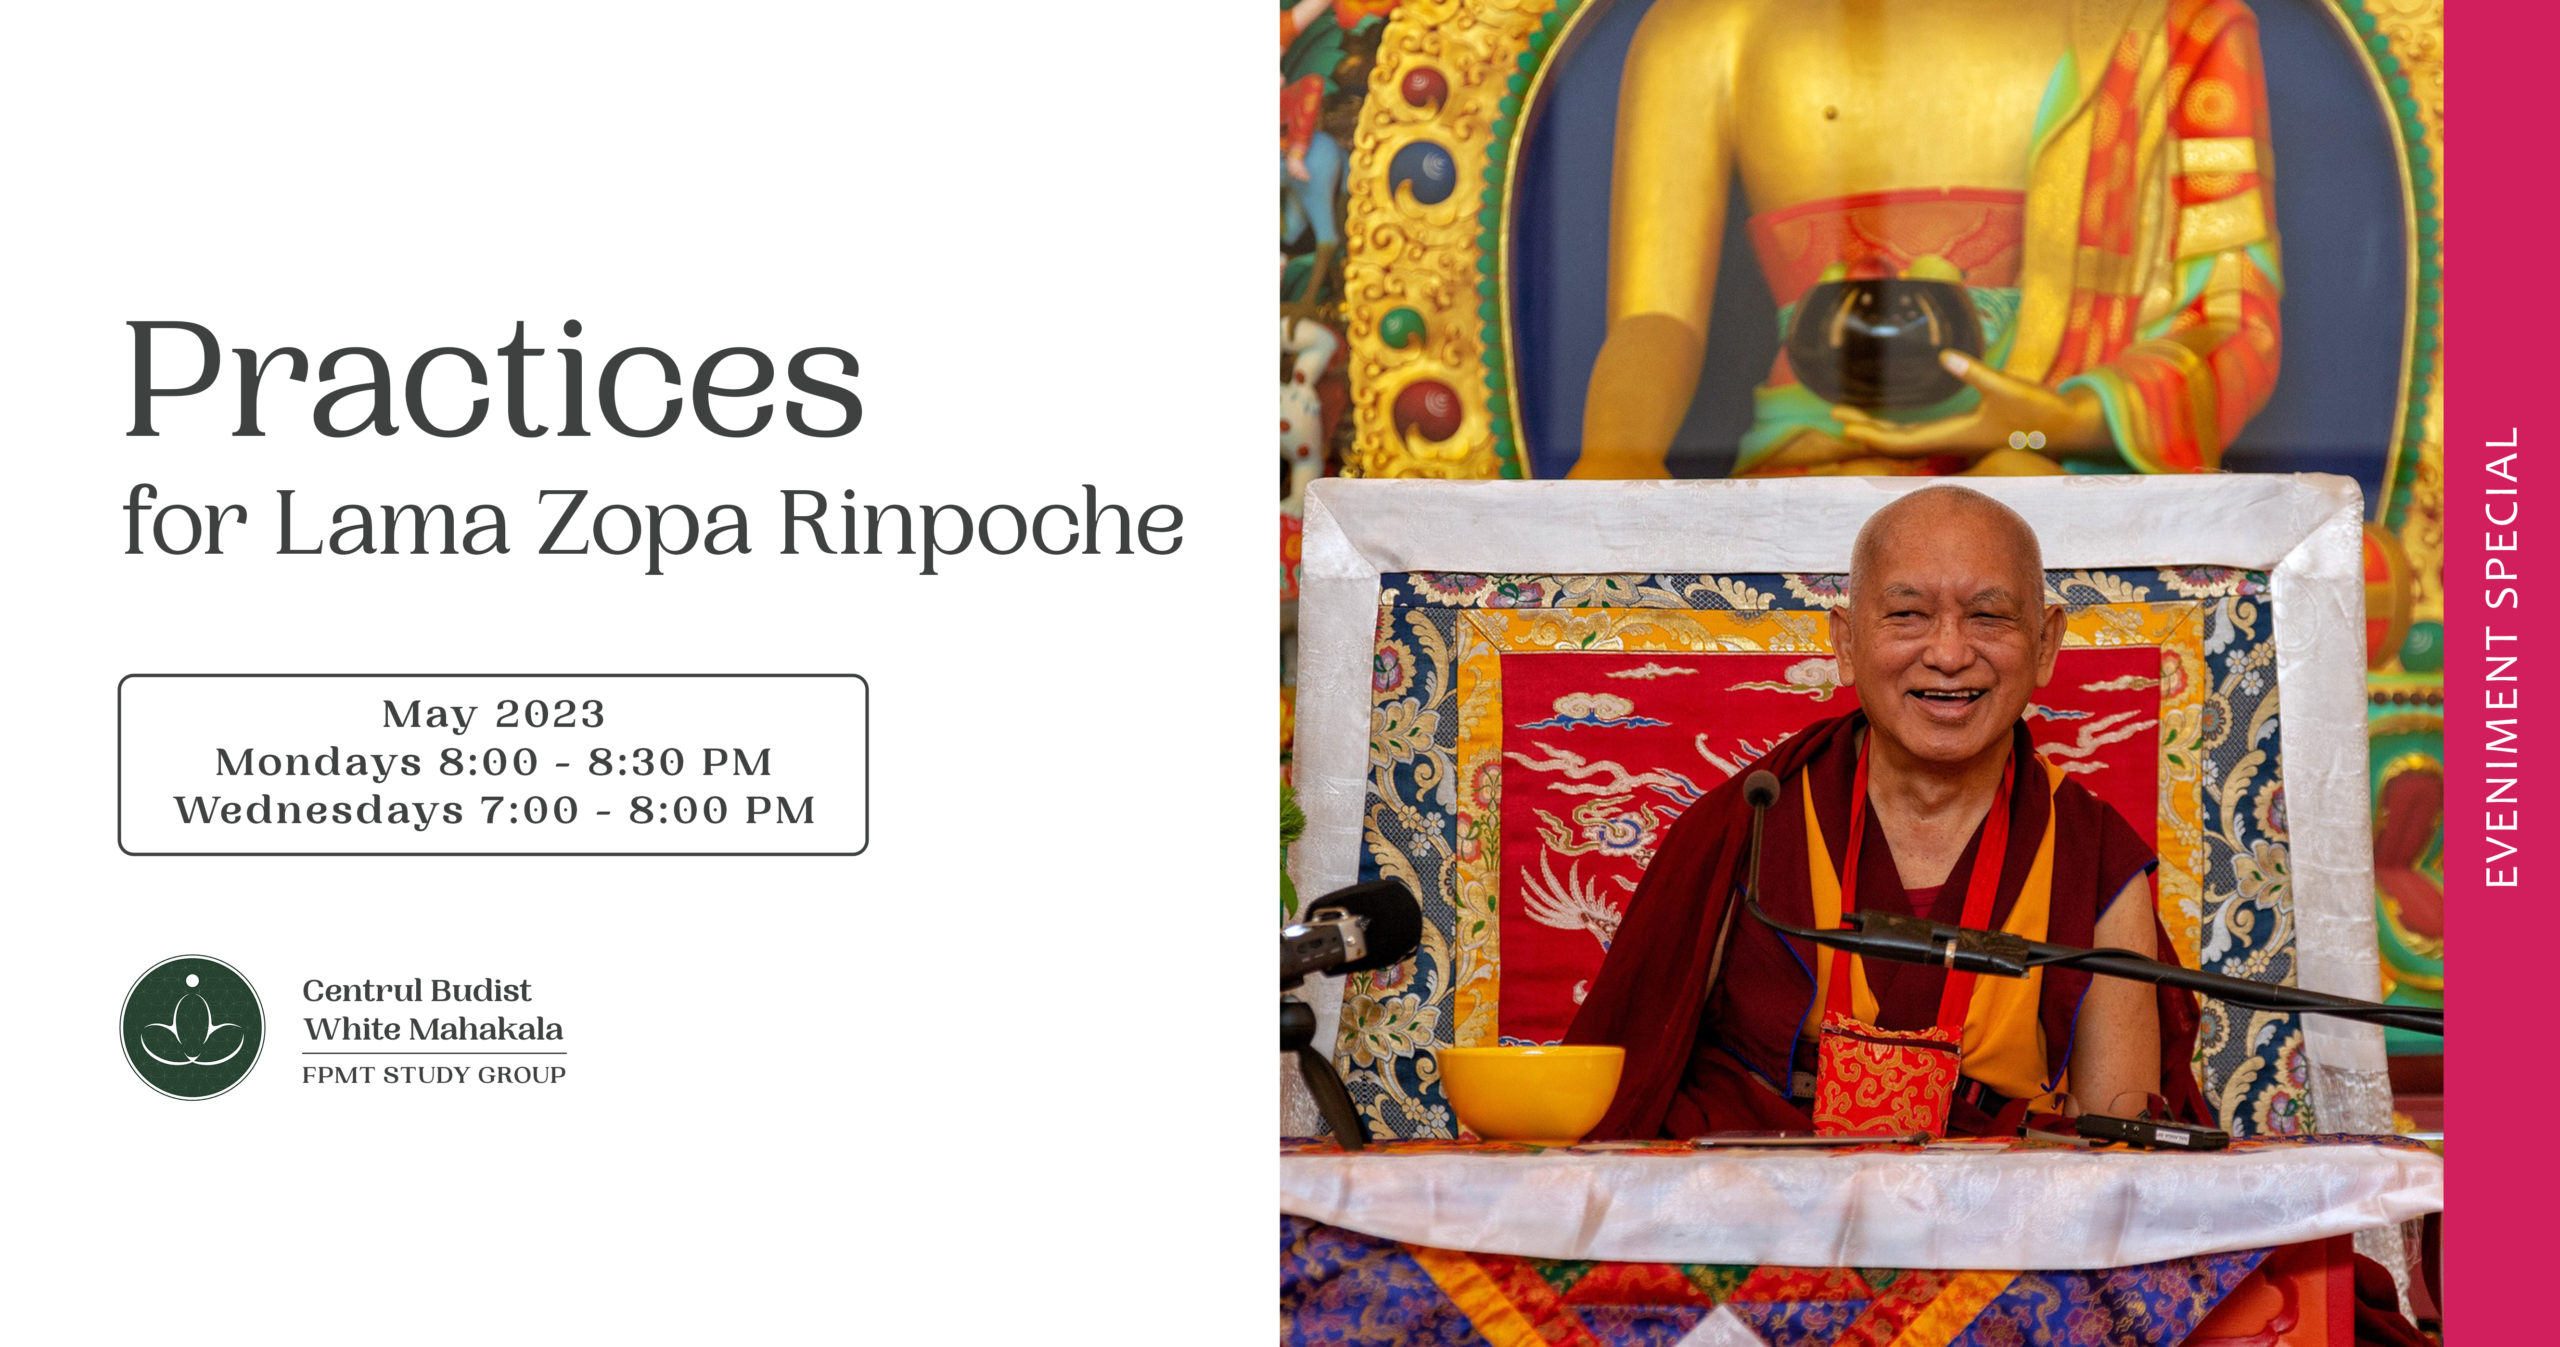 Practices for Lama Zopa Rinpoche